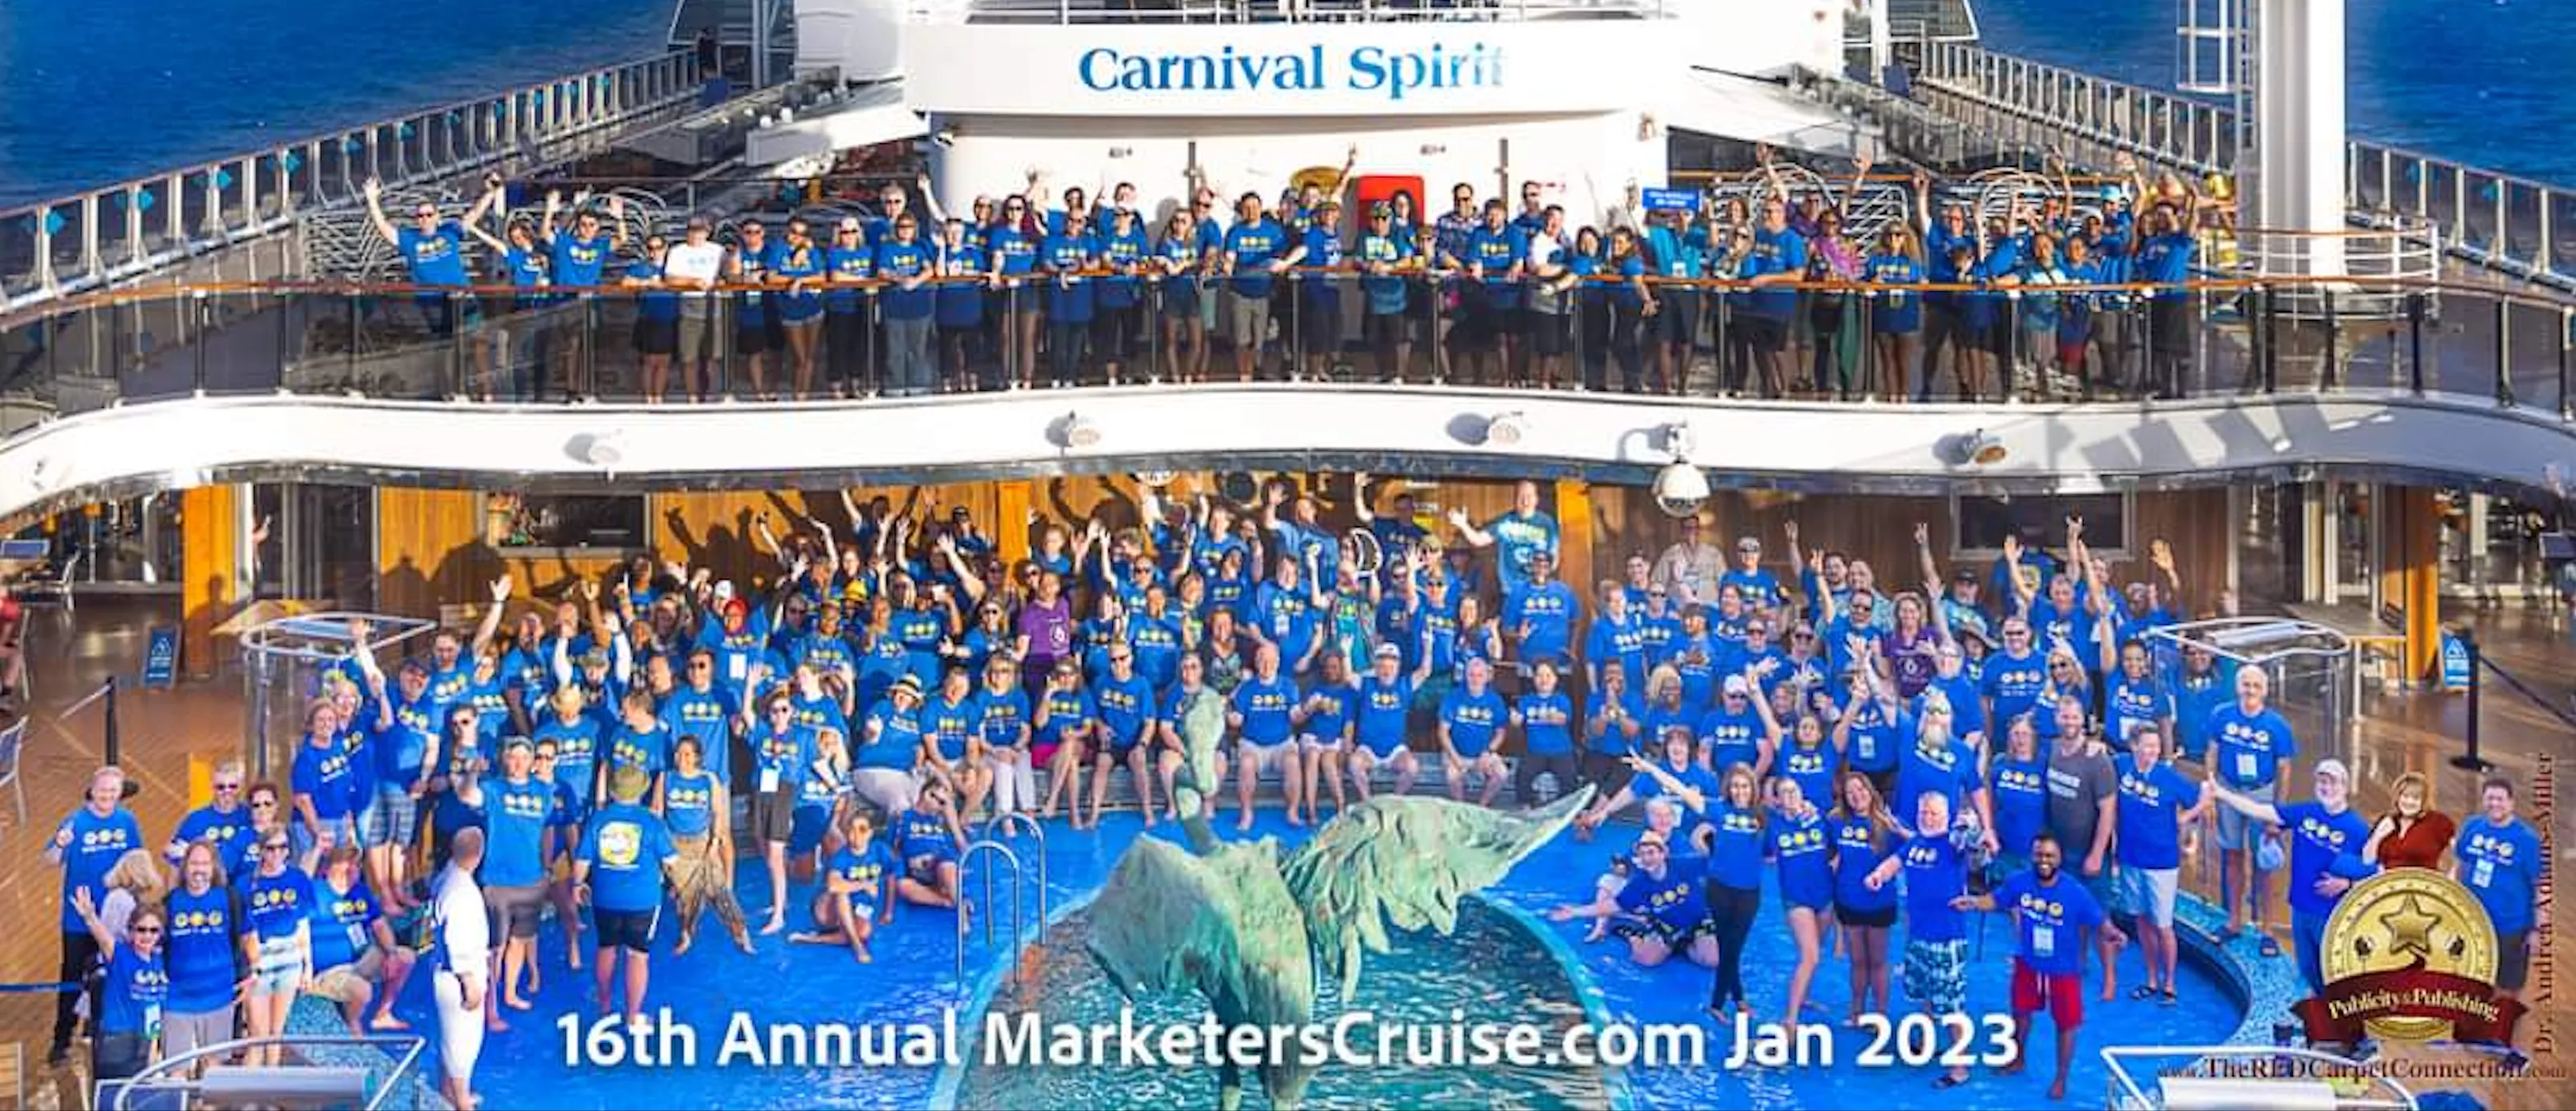 grupal photo from all Marketers Cruise atteddes 